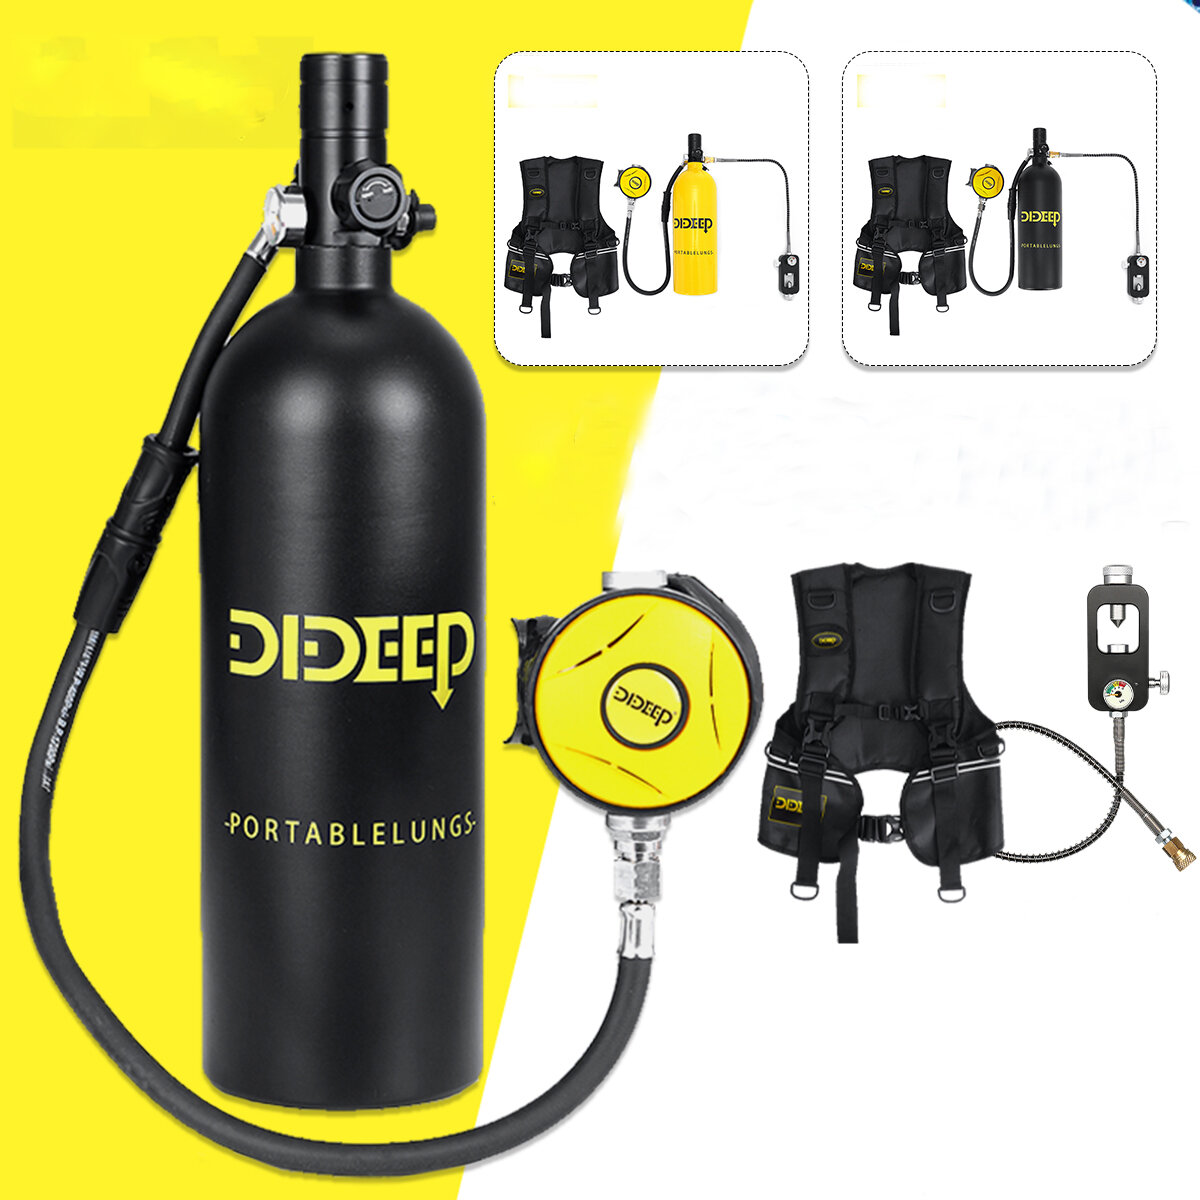 DIDEEP X5000 Pro 2L Diving Scuba Tank Set Oxygen Dive Equipment with Vest Bag Adapter Kit Air Cylinder Underwater Diving Set